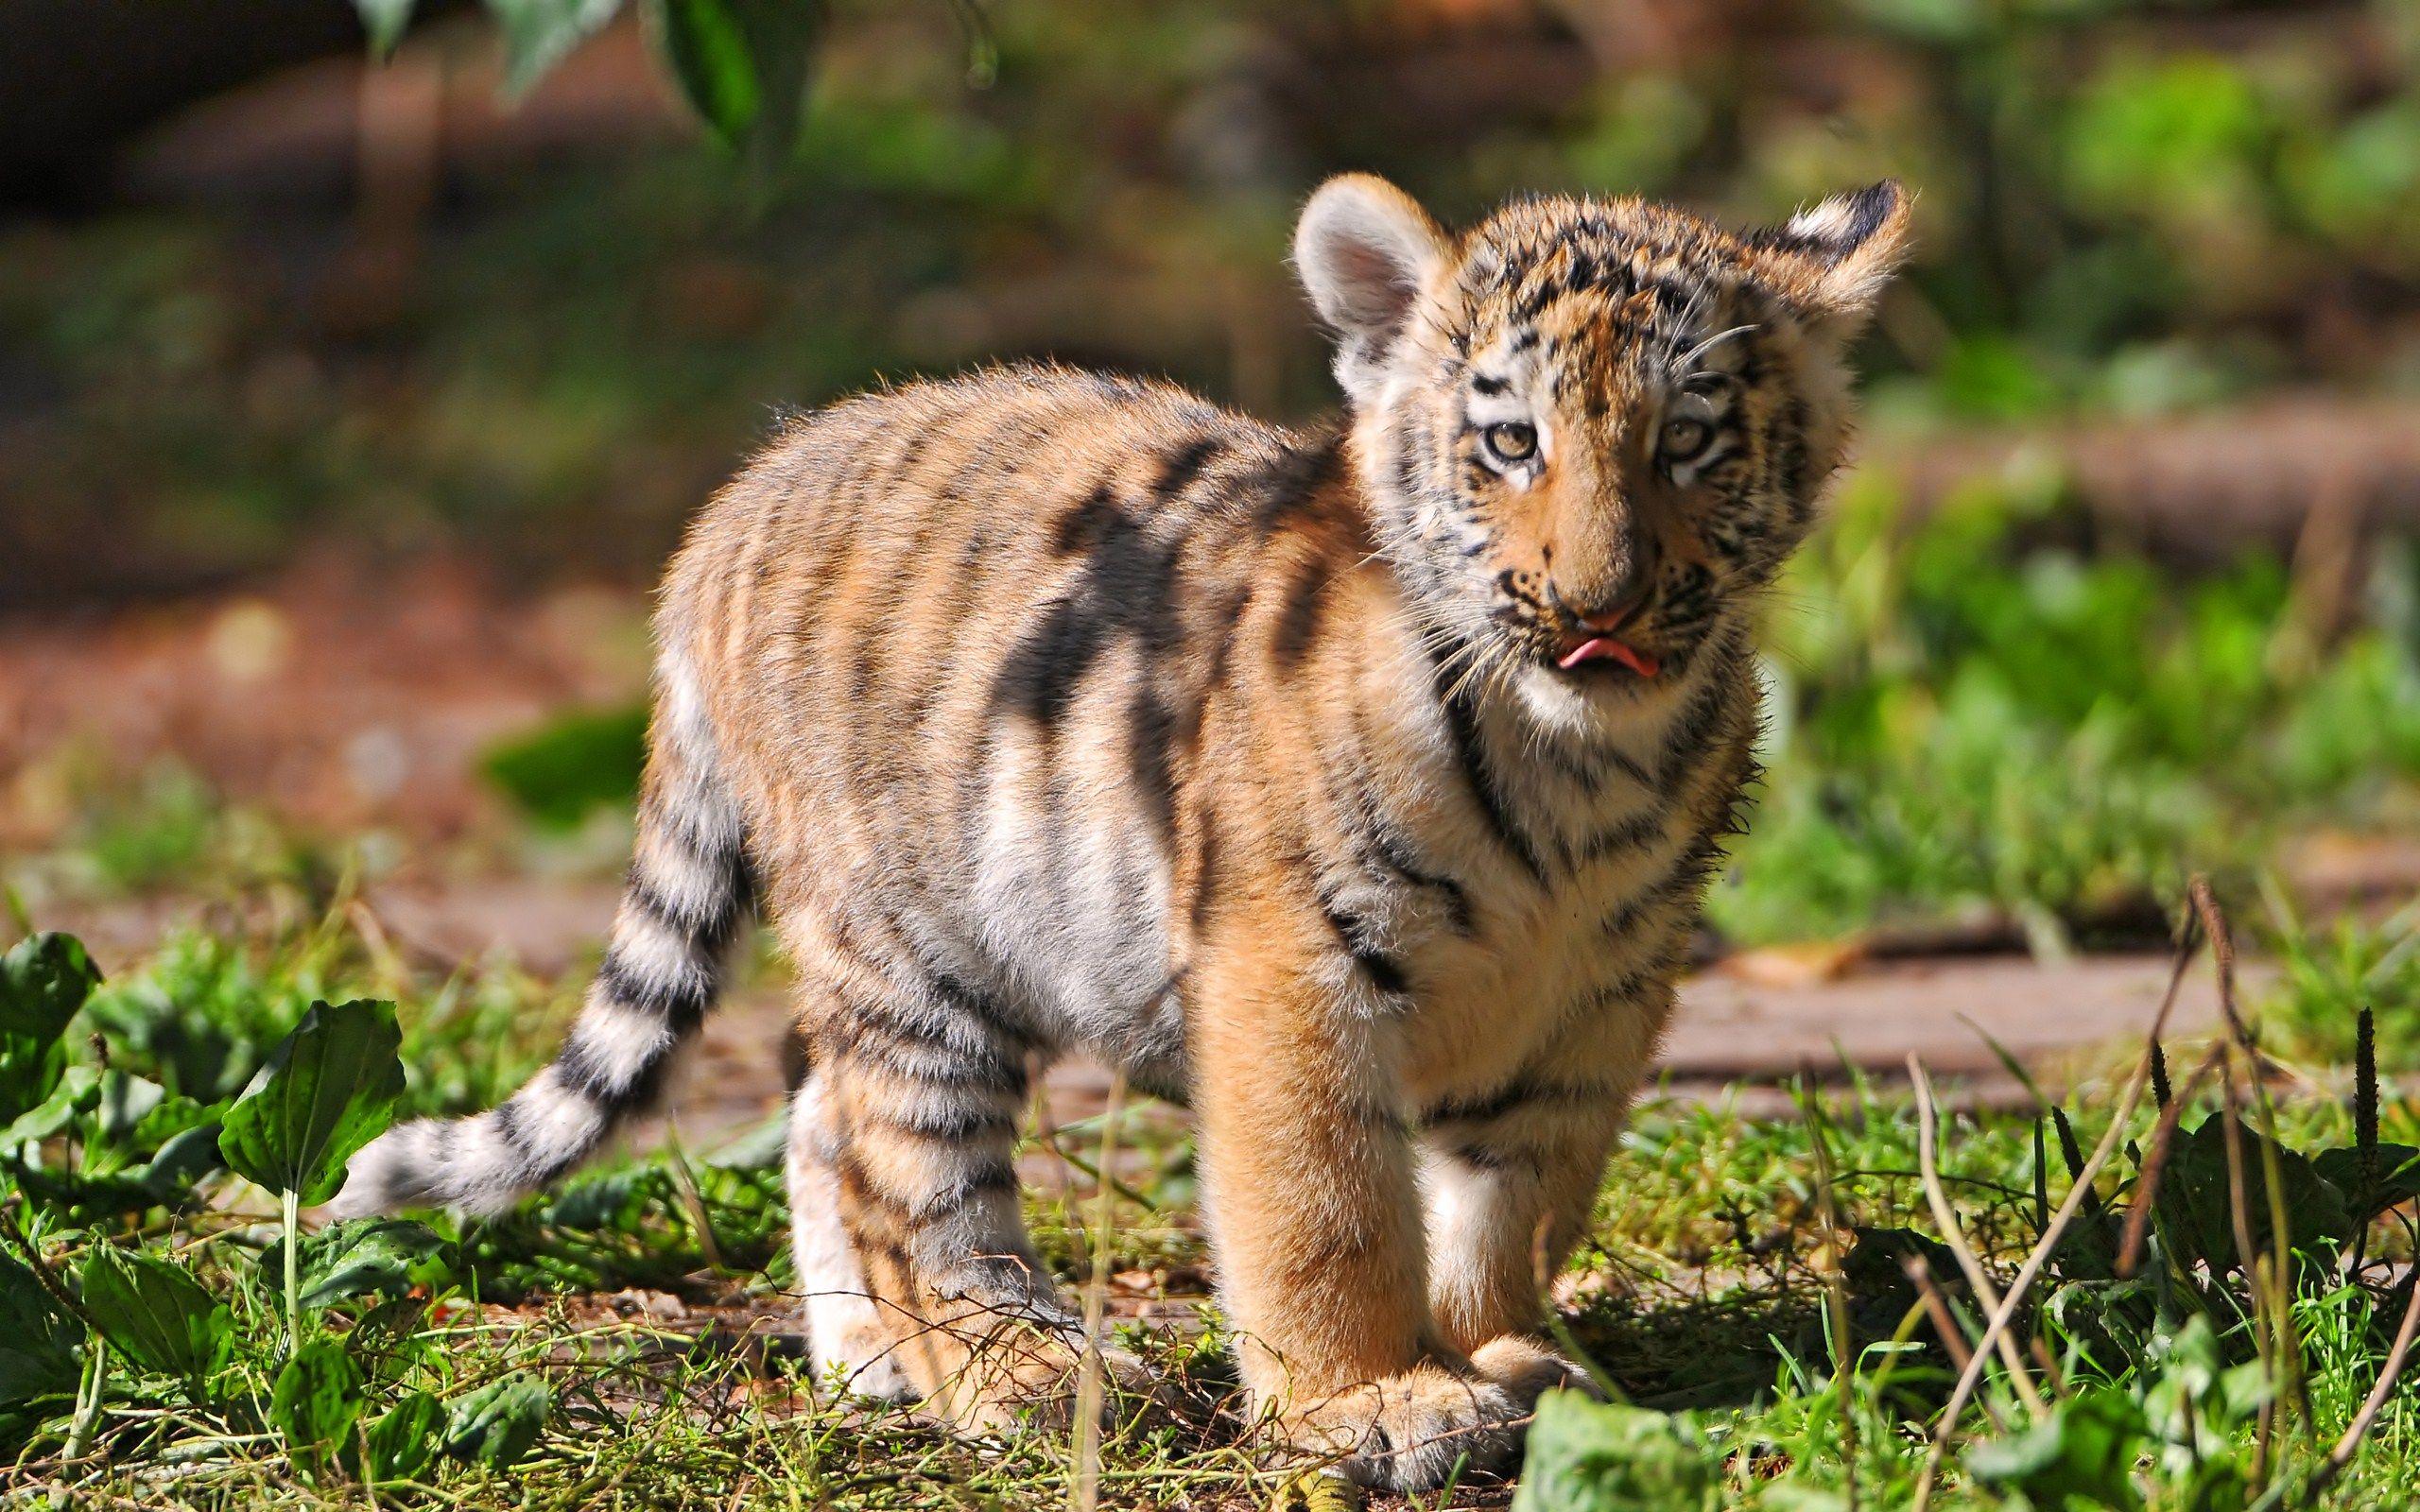 Baby Tiger Wallpaper Background HD 60127 2560x1600 px